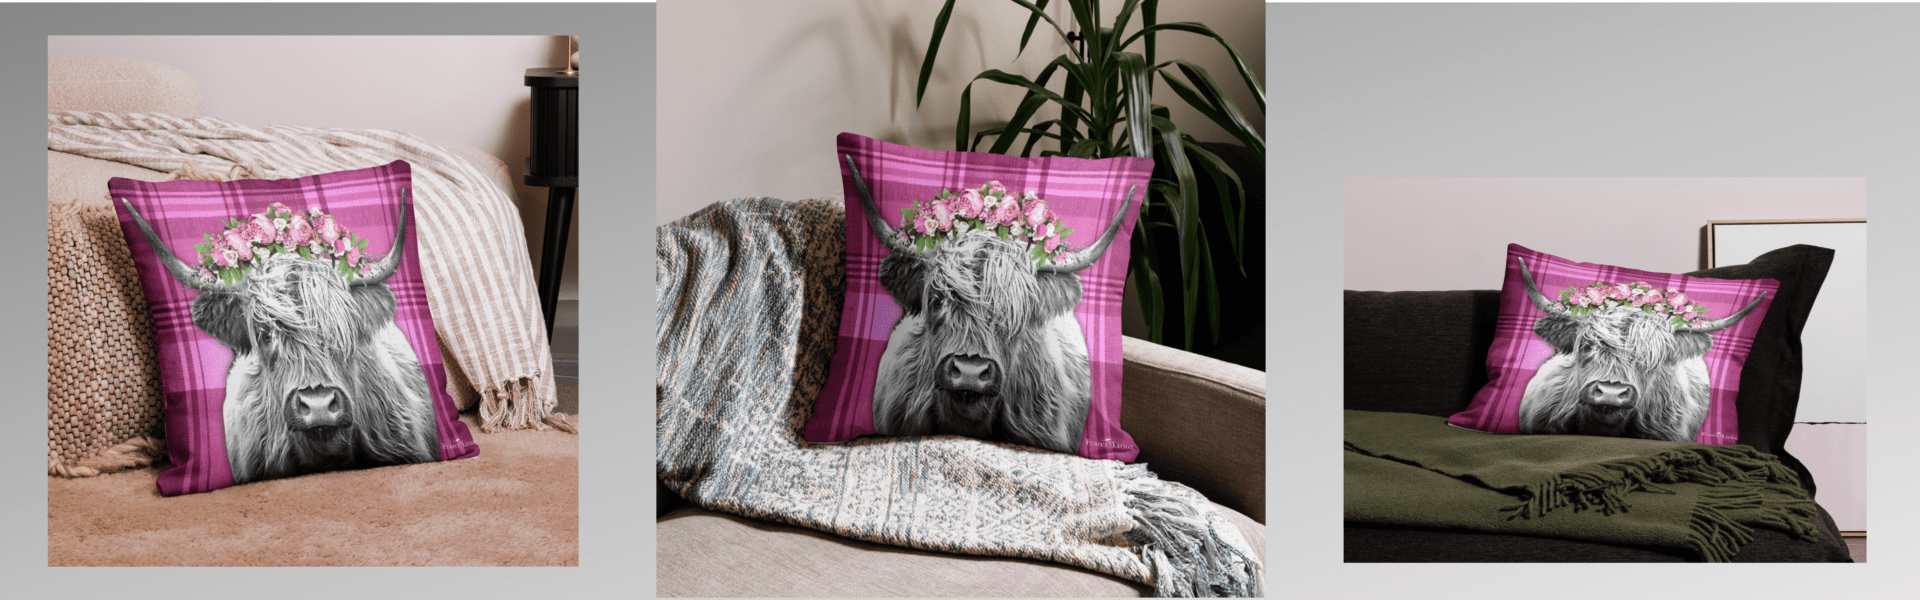 Highland cow pillow with pink plaid and flowers.